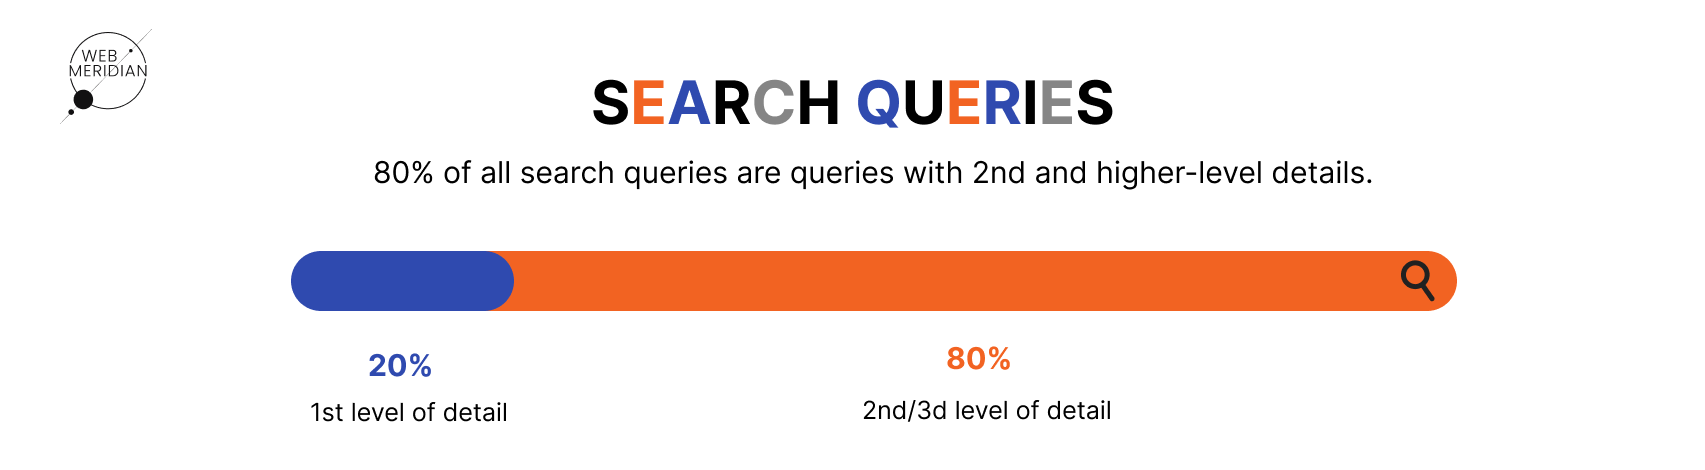 80% of all search queries are queries with 2nd and higher-level details.